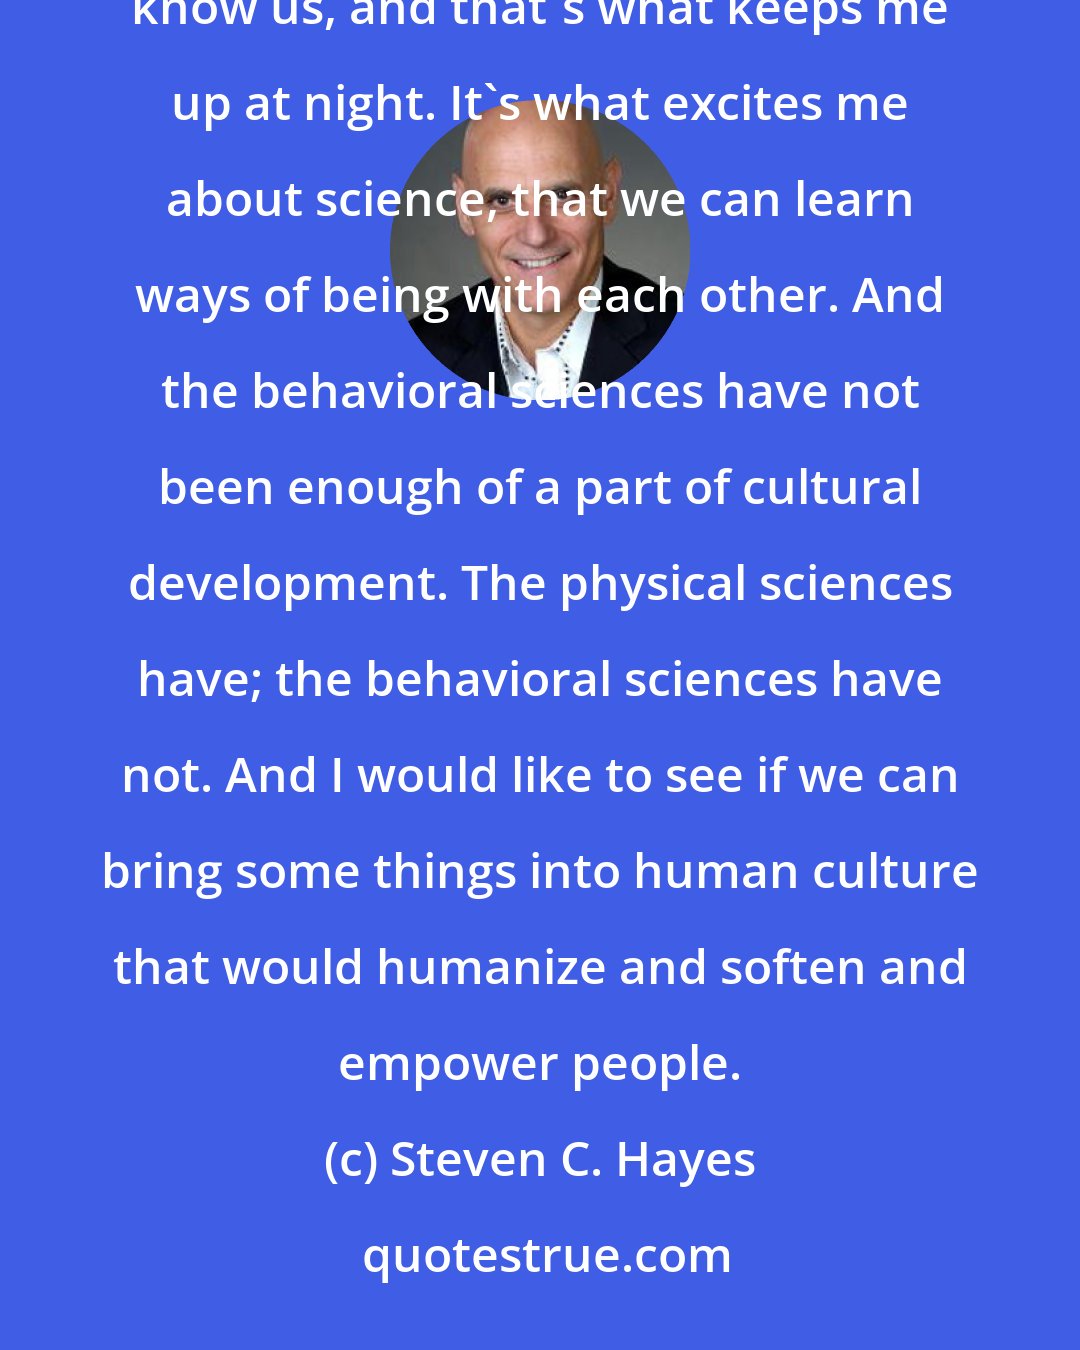 Steven C. Hayes: The changes that we can make in the culture can be there for people that we will never meet, that will never know us, and that's what keeps me up at night. It's what excites me about science, that we can learn ways of being with each other. And the behavioral sciences have not been enough of a part of cultural development. The physical sciences have; the behavioral sciences have not. And I would like to see if we can bring some things into human culture that would humanize and soften and empower people.